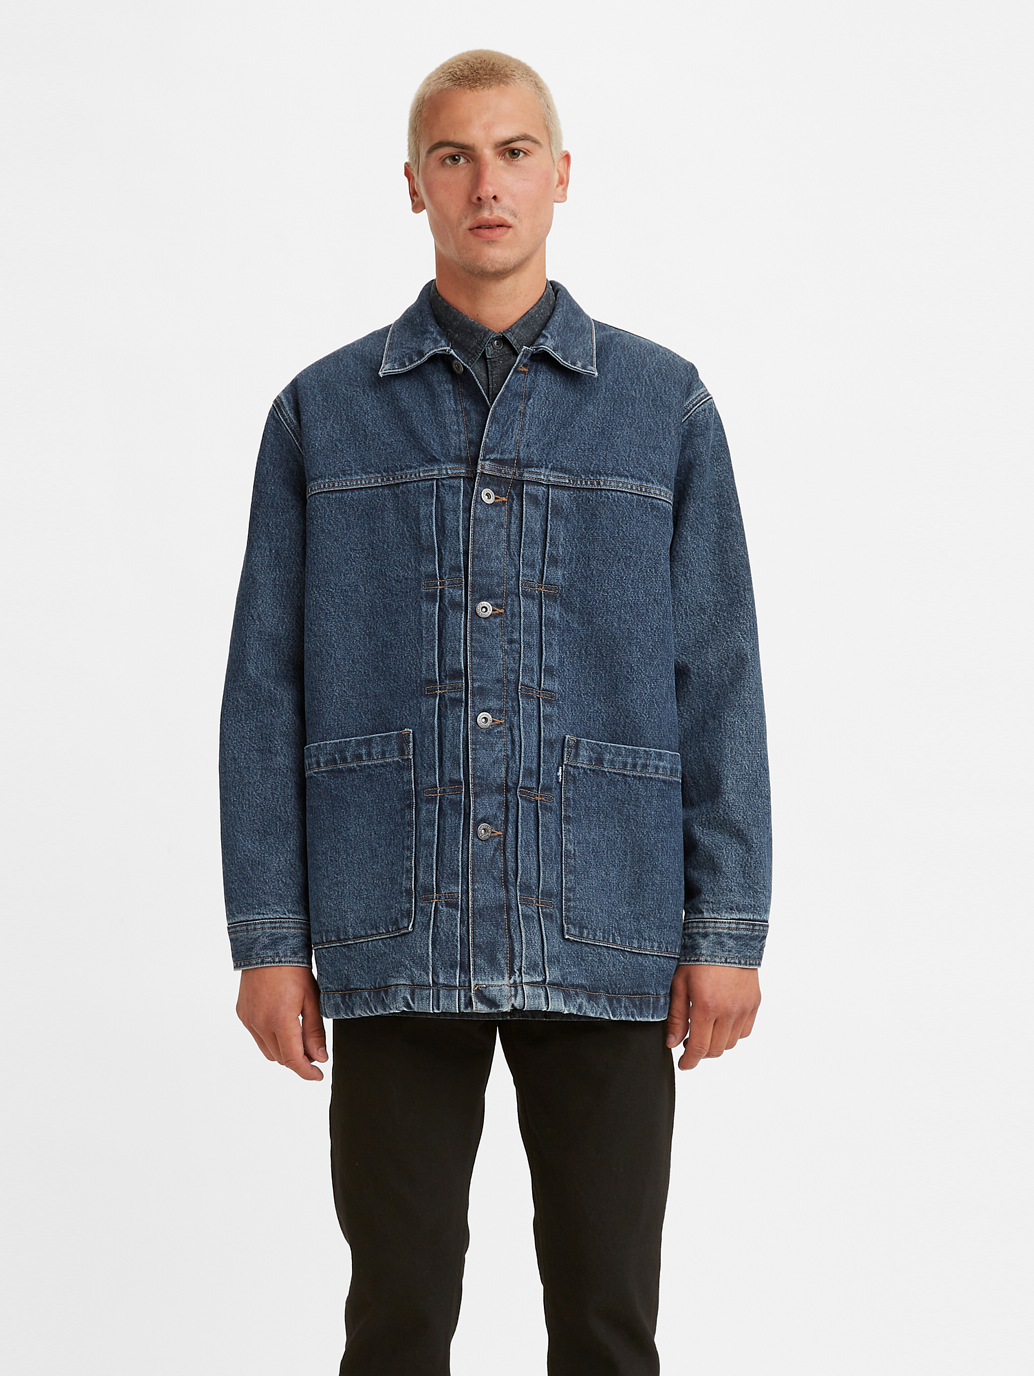 Buy Levi's® Made & Crafted® Men's Slouchy Type ii Trucker Jacket